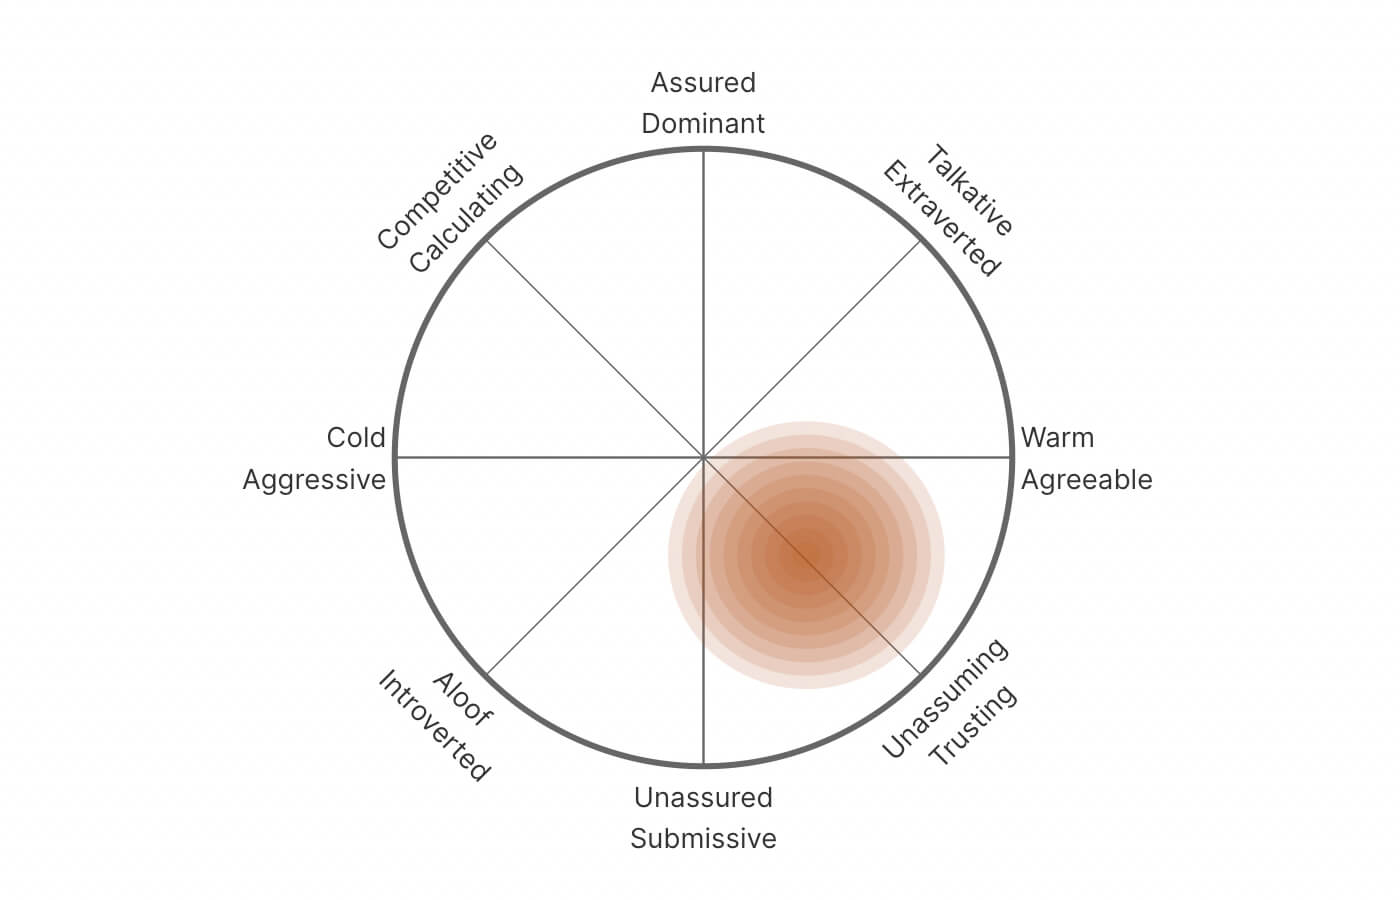 A screenshot of TraitLab's interpersonal style analysis results.